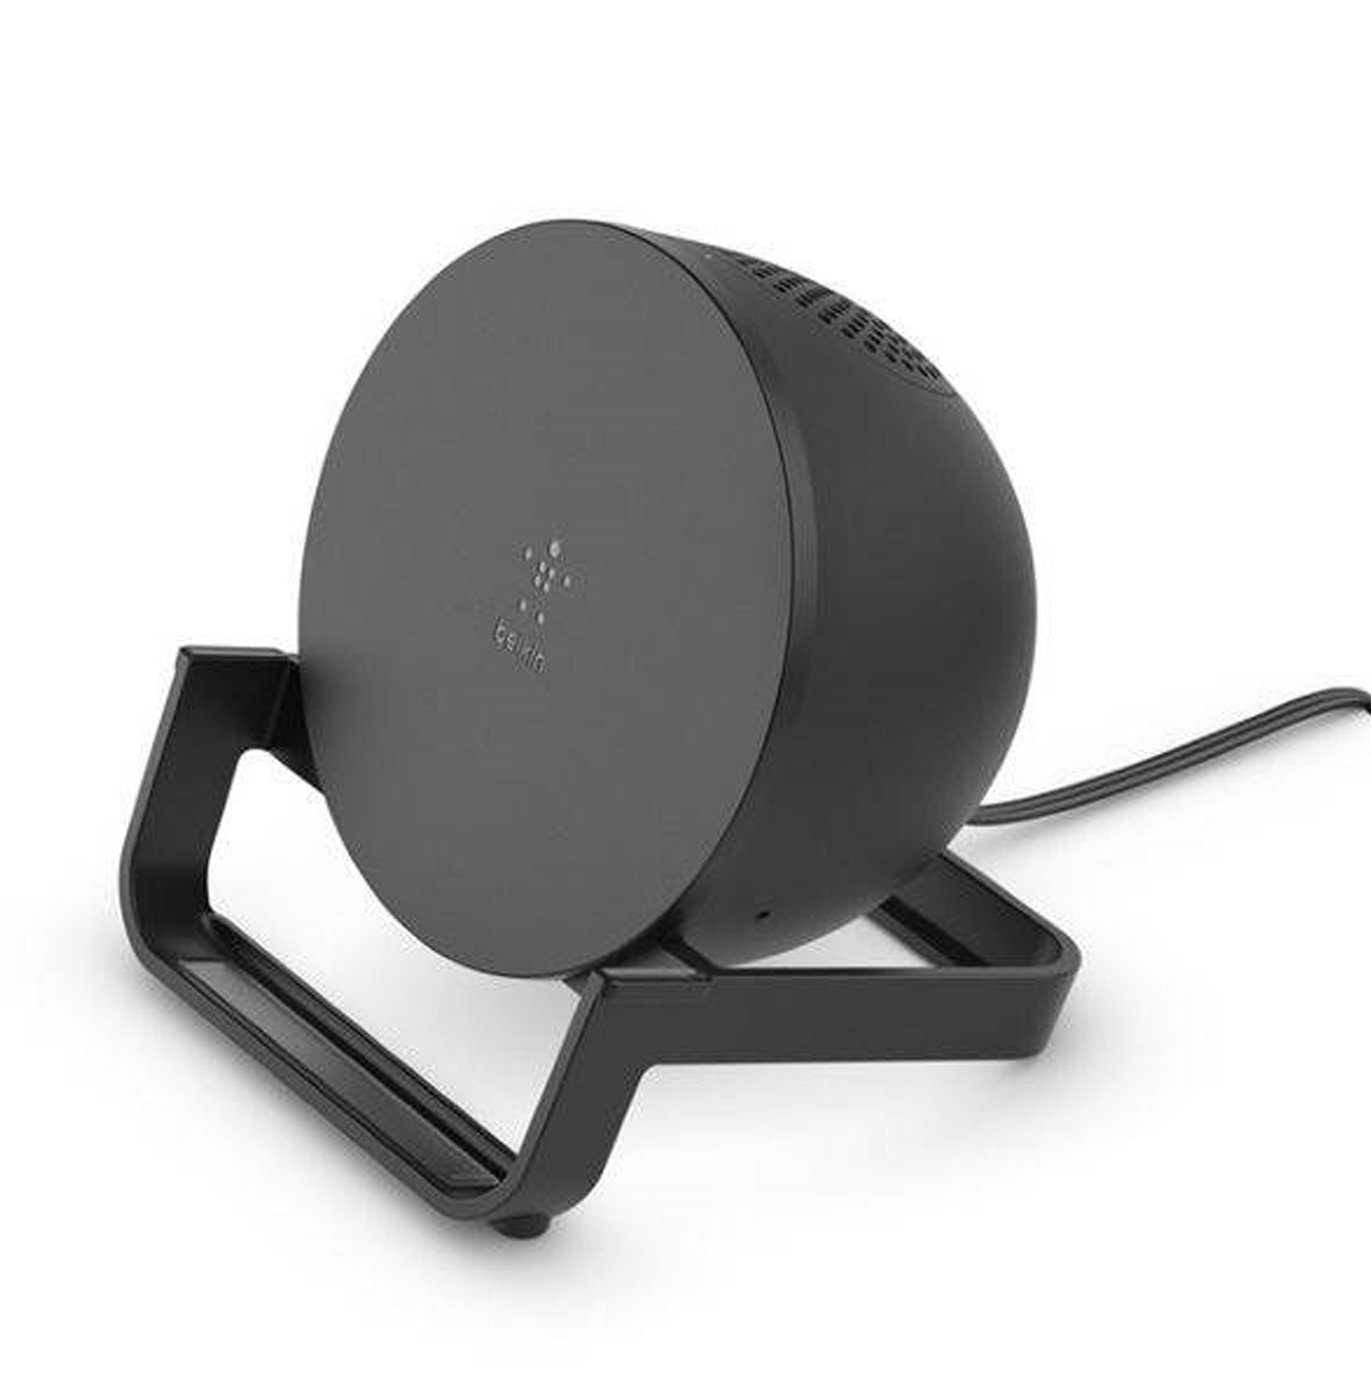 Belkin 10W Wireless Charger Stand & Speaker Incl. Plug Review